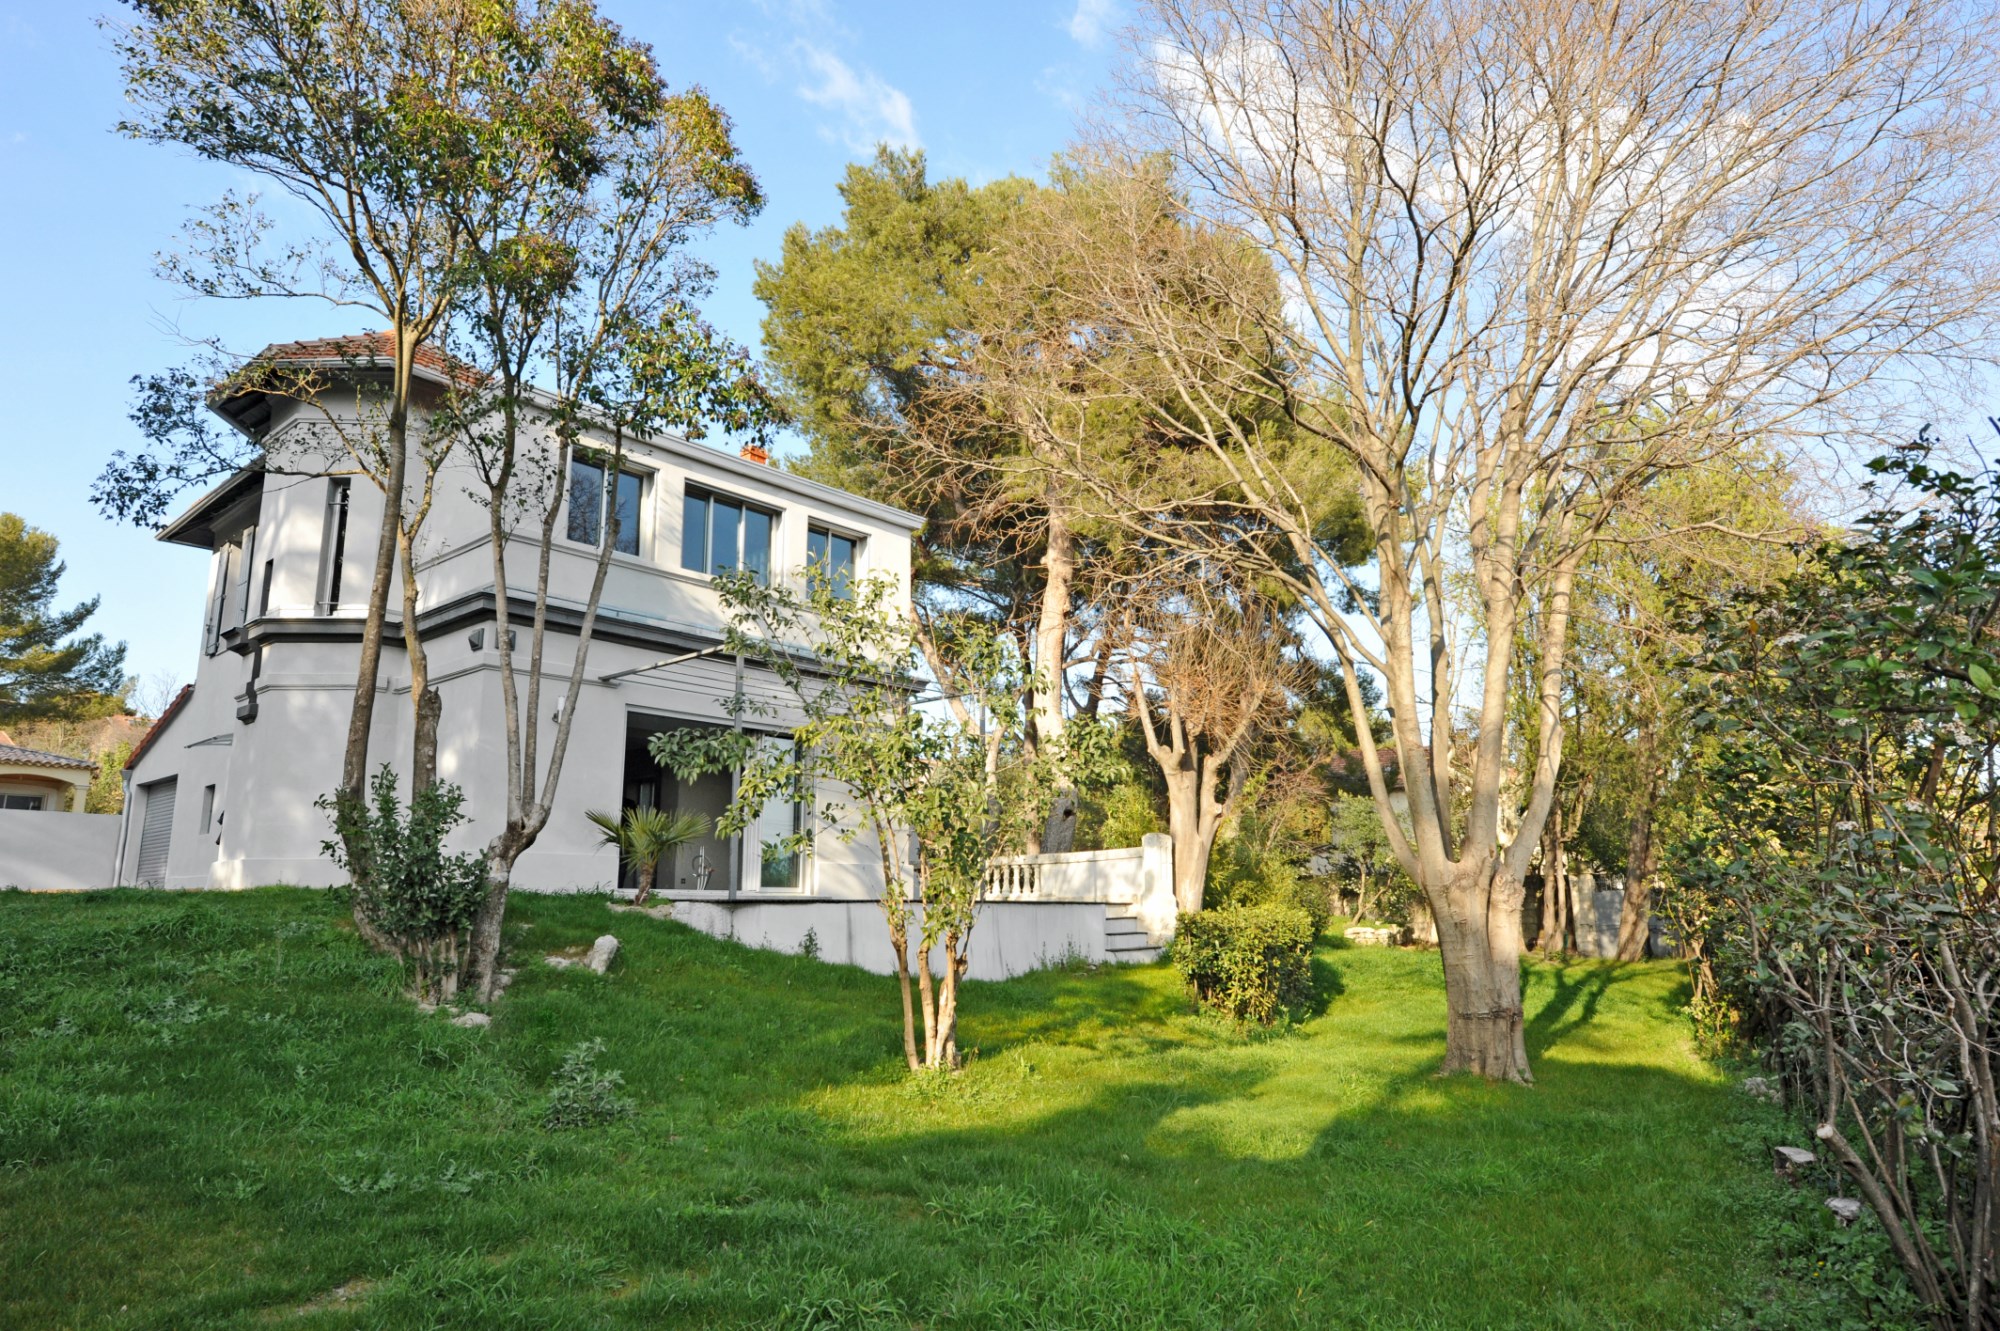 Near Avignon, for sale, beautiful house with garden and lovely views on the valley du Rhone